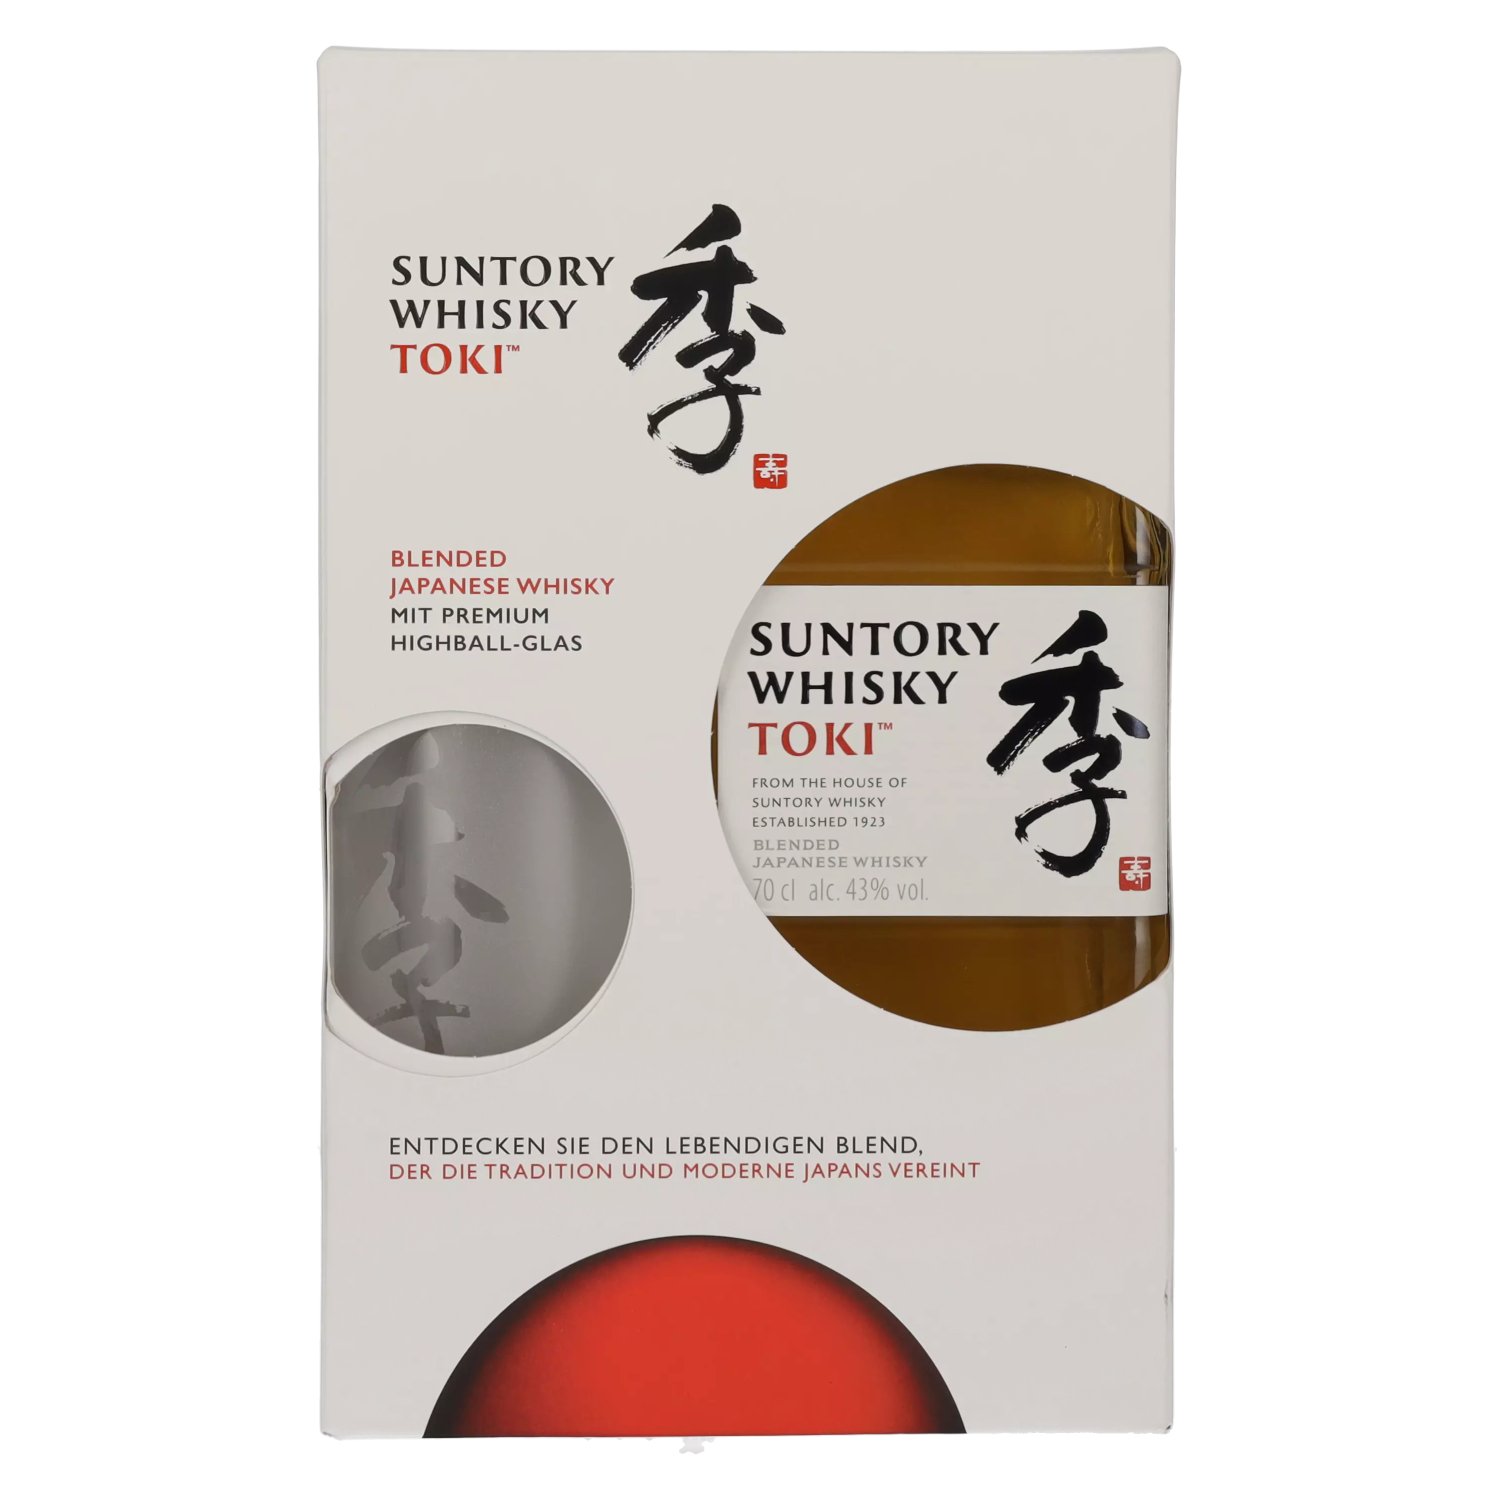 Highball Vol. Whisky 43% in glass Giftbox Blended with TOKI 0,7l Japanese Suntory